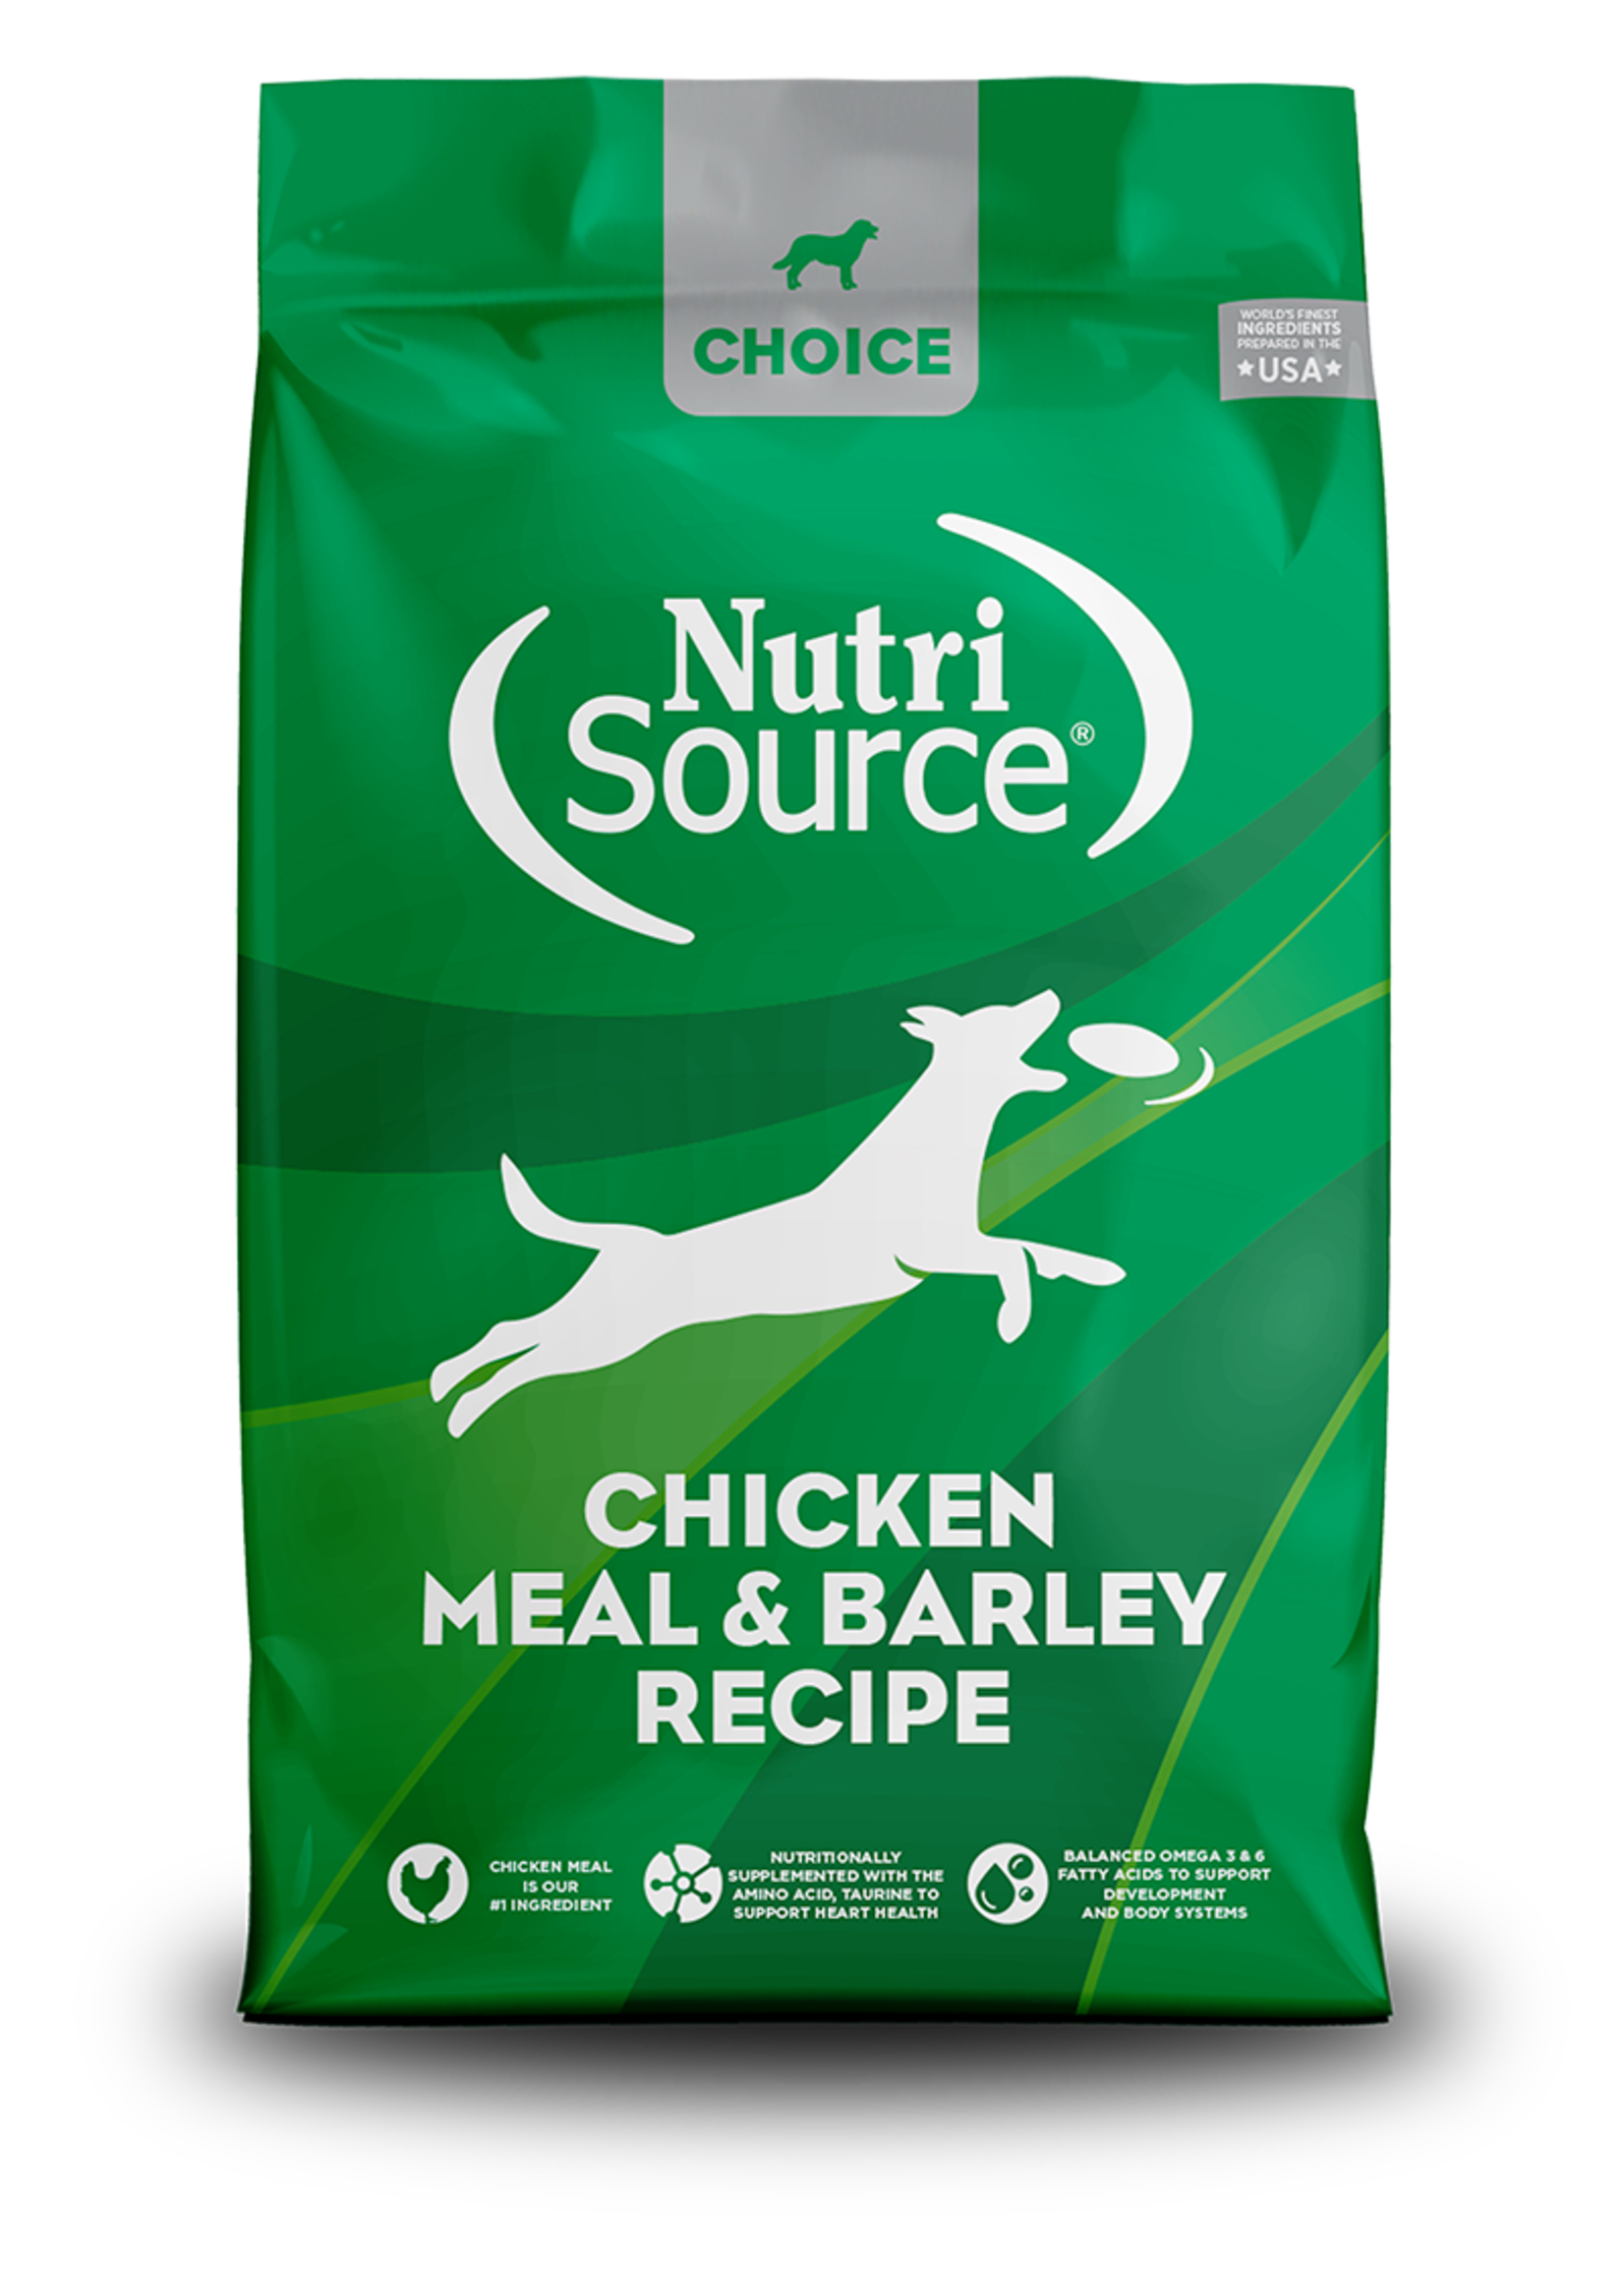 Nutrisource Choice Chicken Meal & Barley Recipe